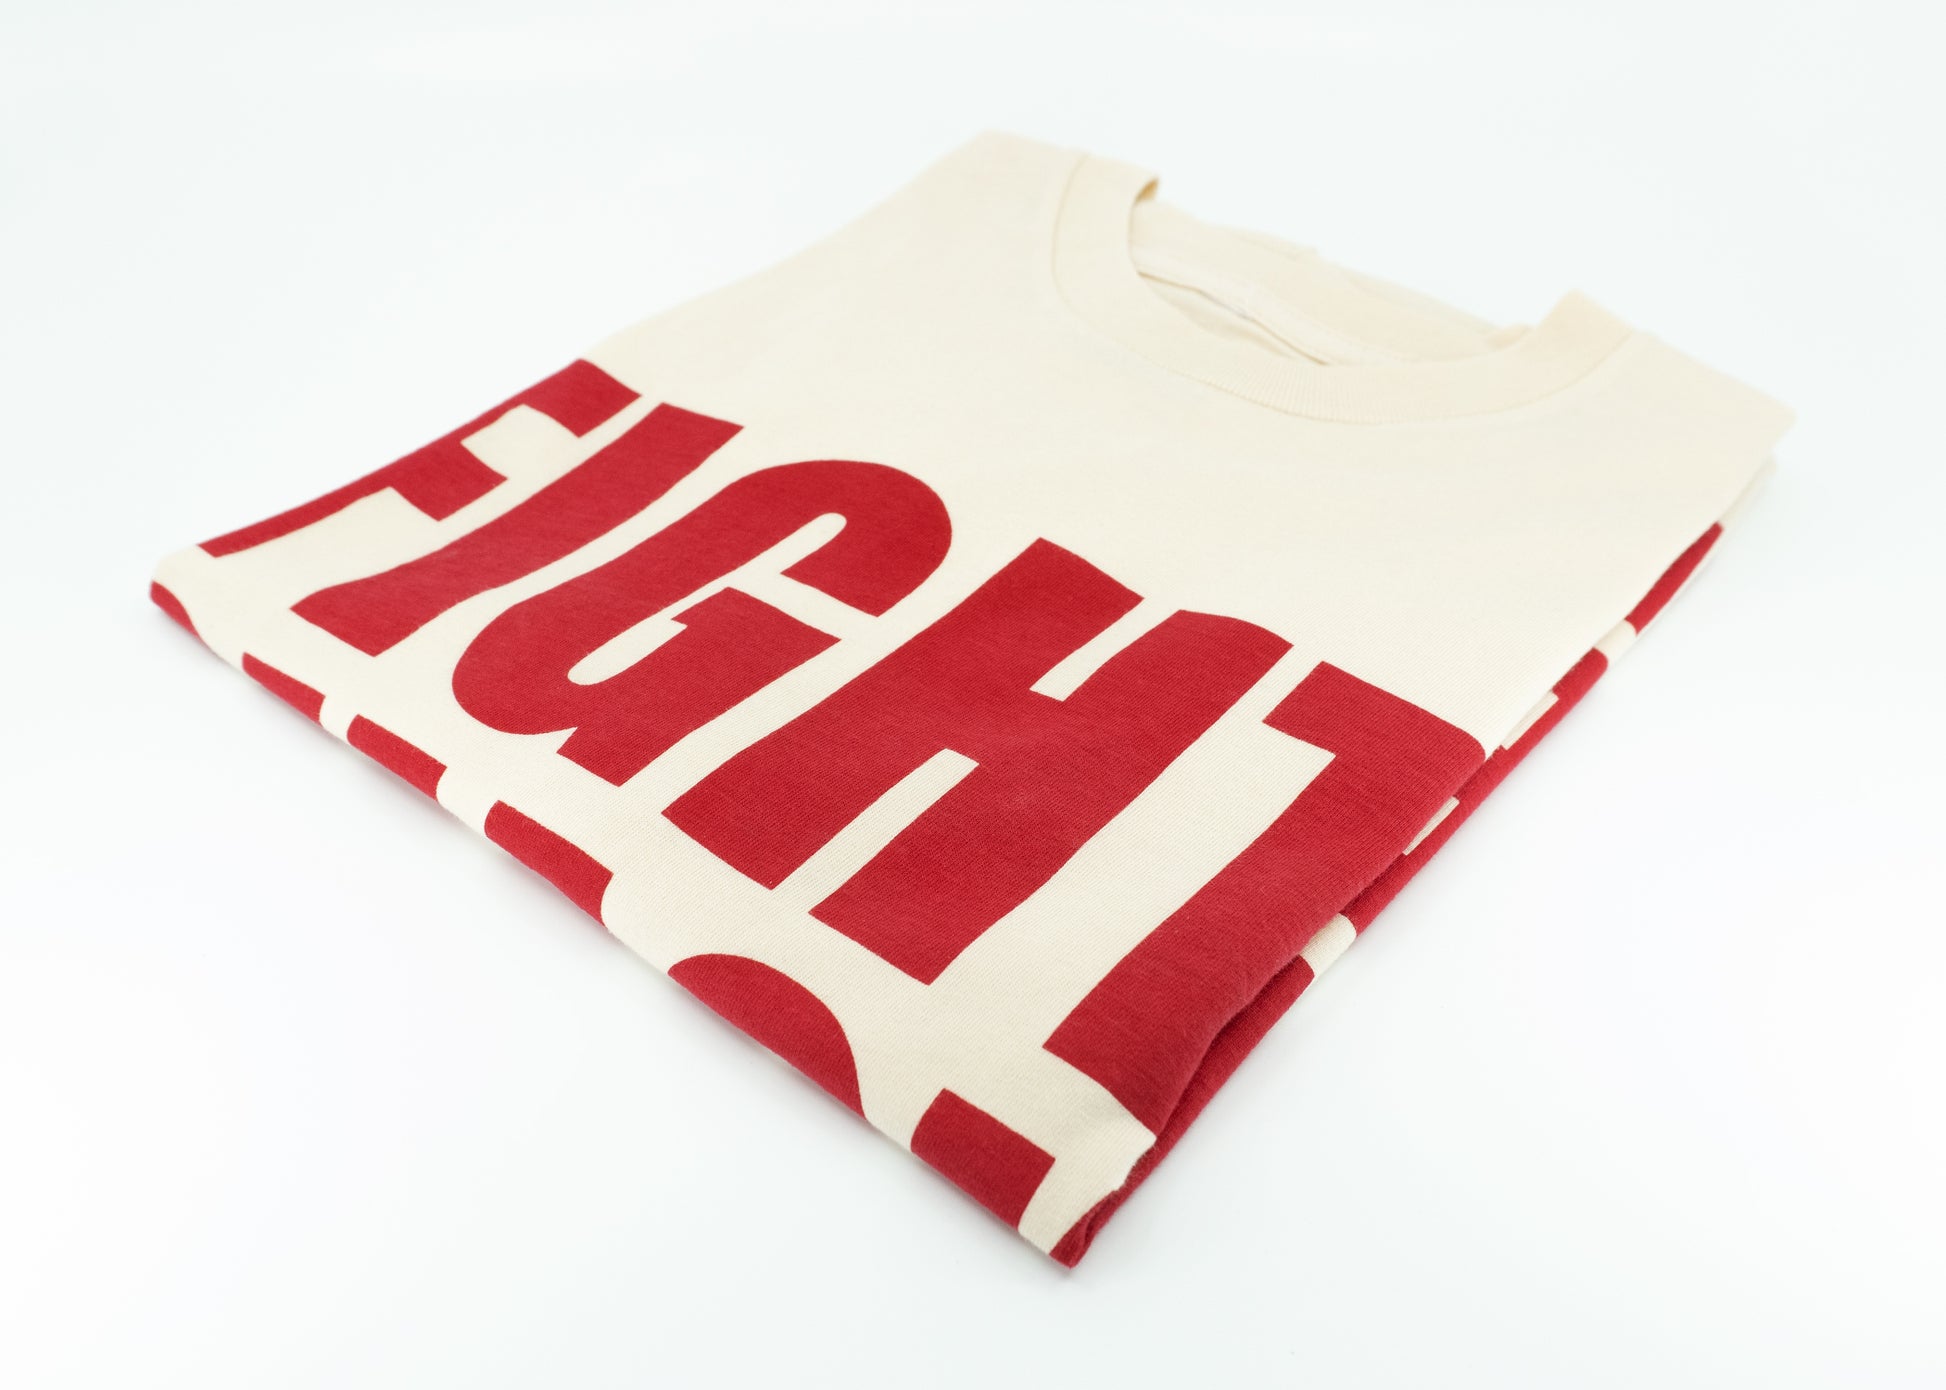 BLACK DYNAMITE! "Fight Smack in the Orphanage" Cream/Red Tee by Titmouse Detail View